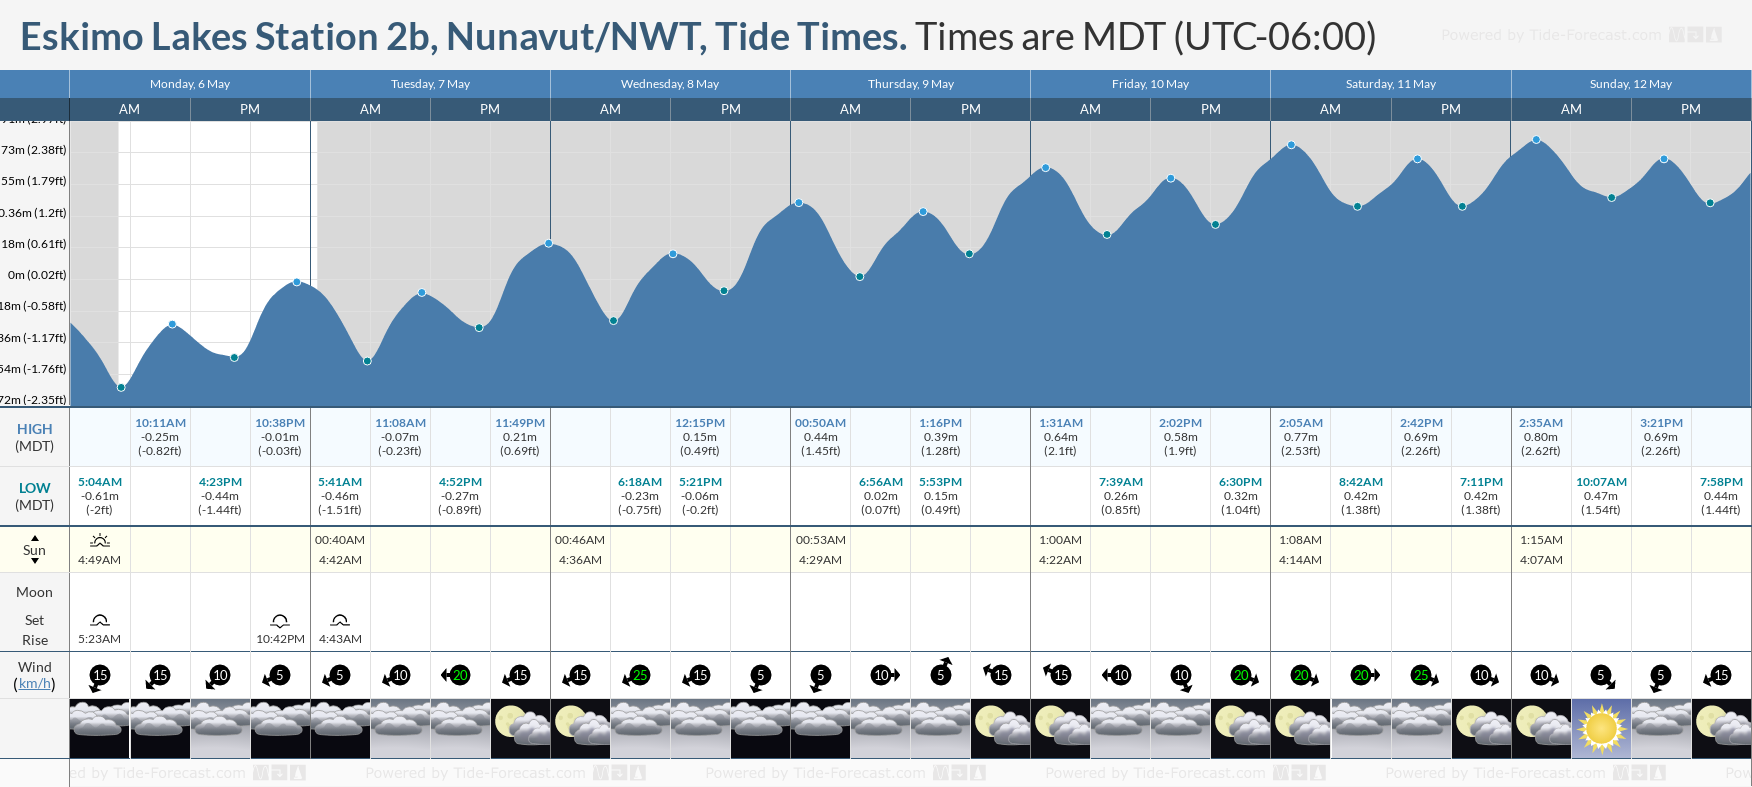 Eskimo Lakes Station 2b, Nunavut/NWT Tide Chart including high and low tide tide times for the next 7 days